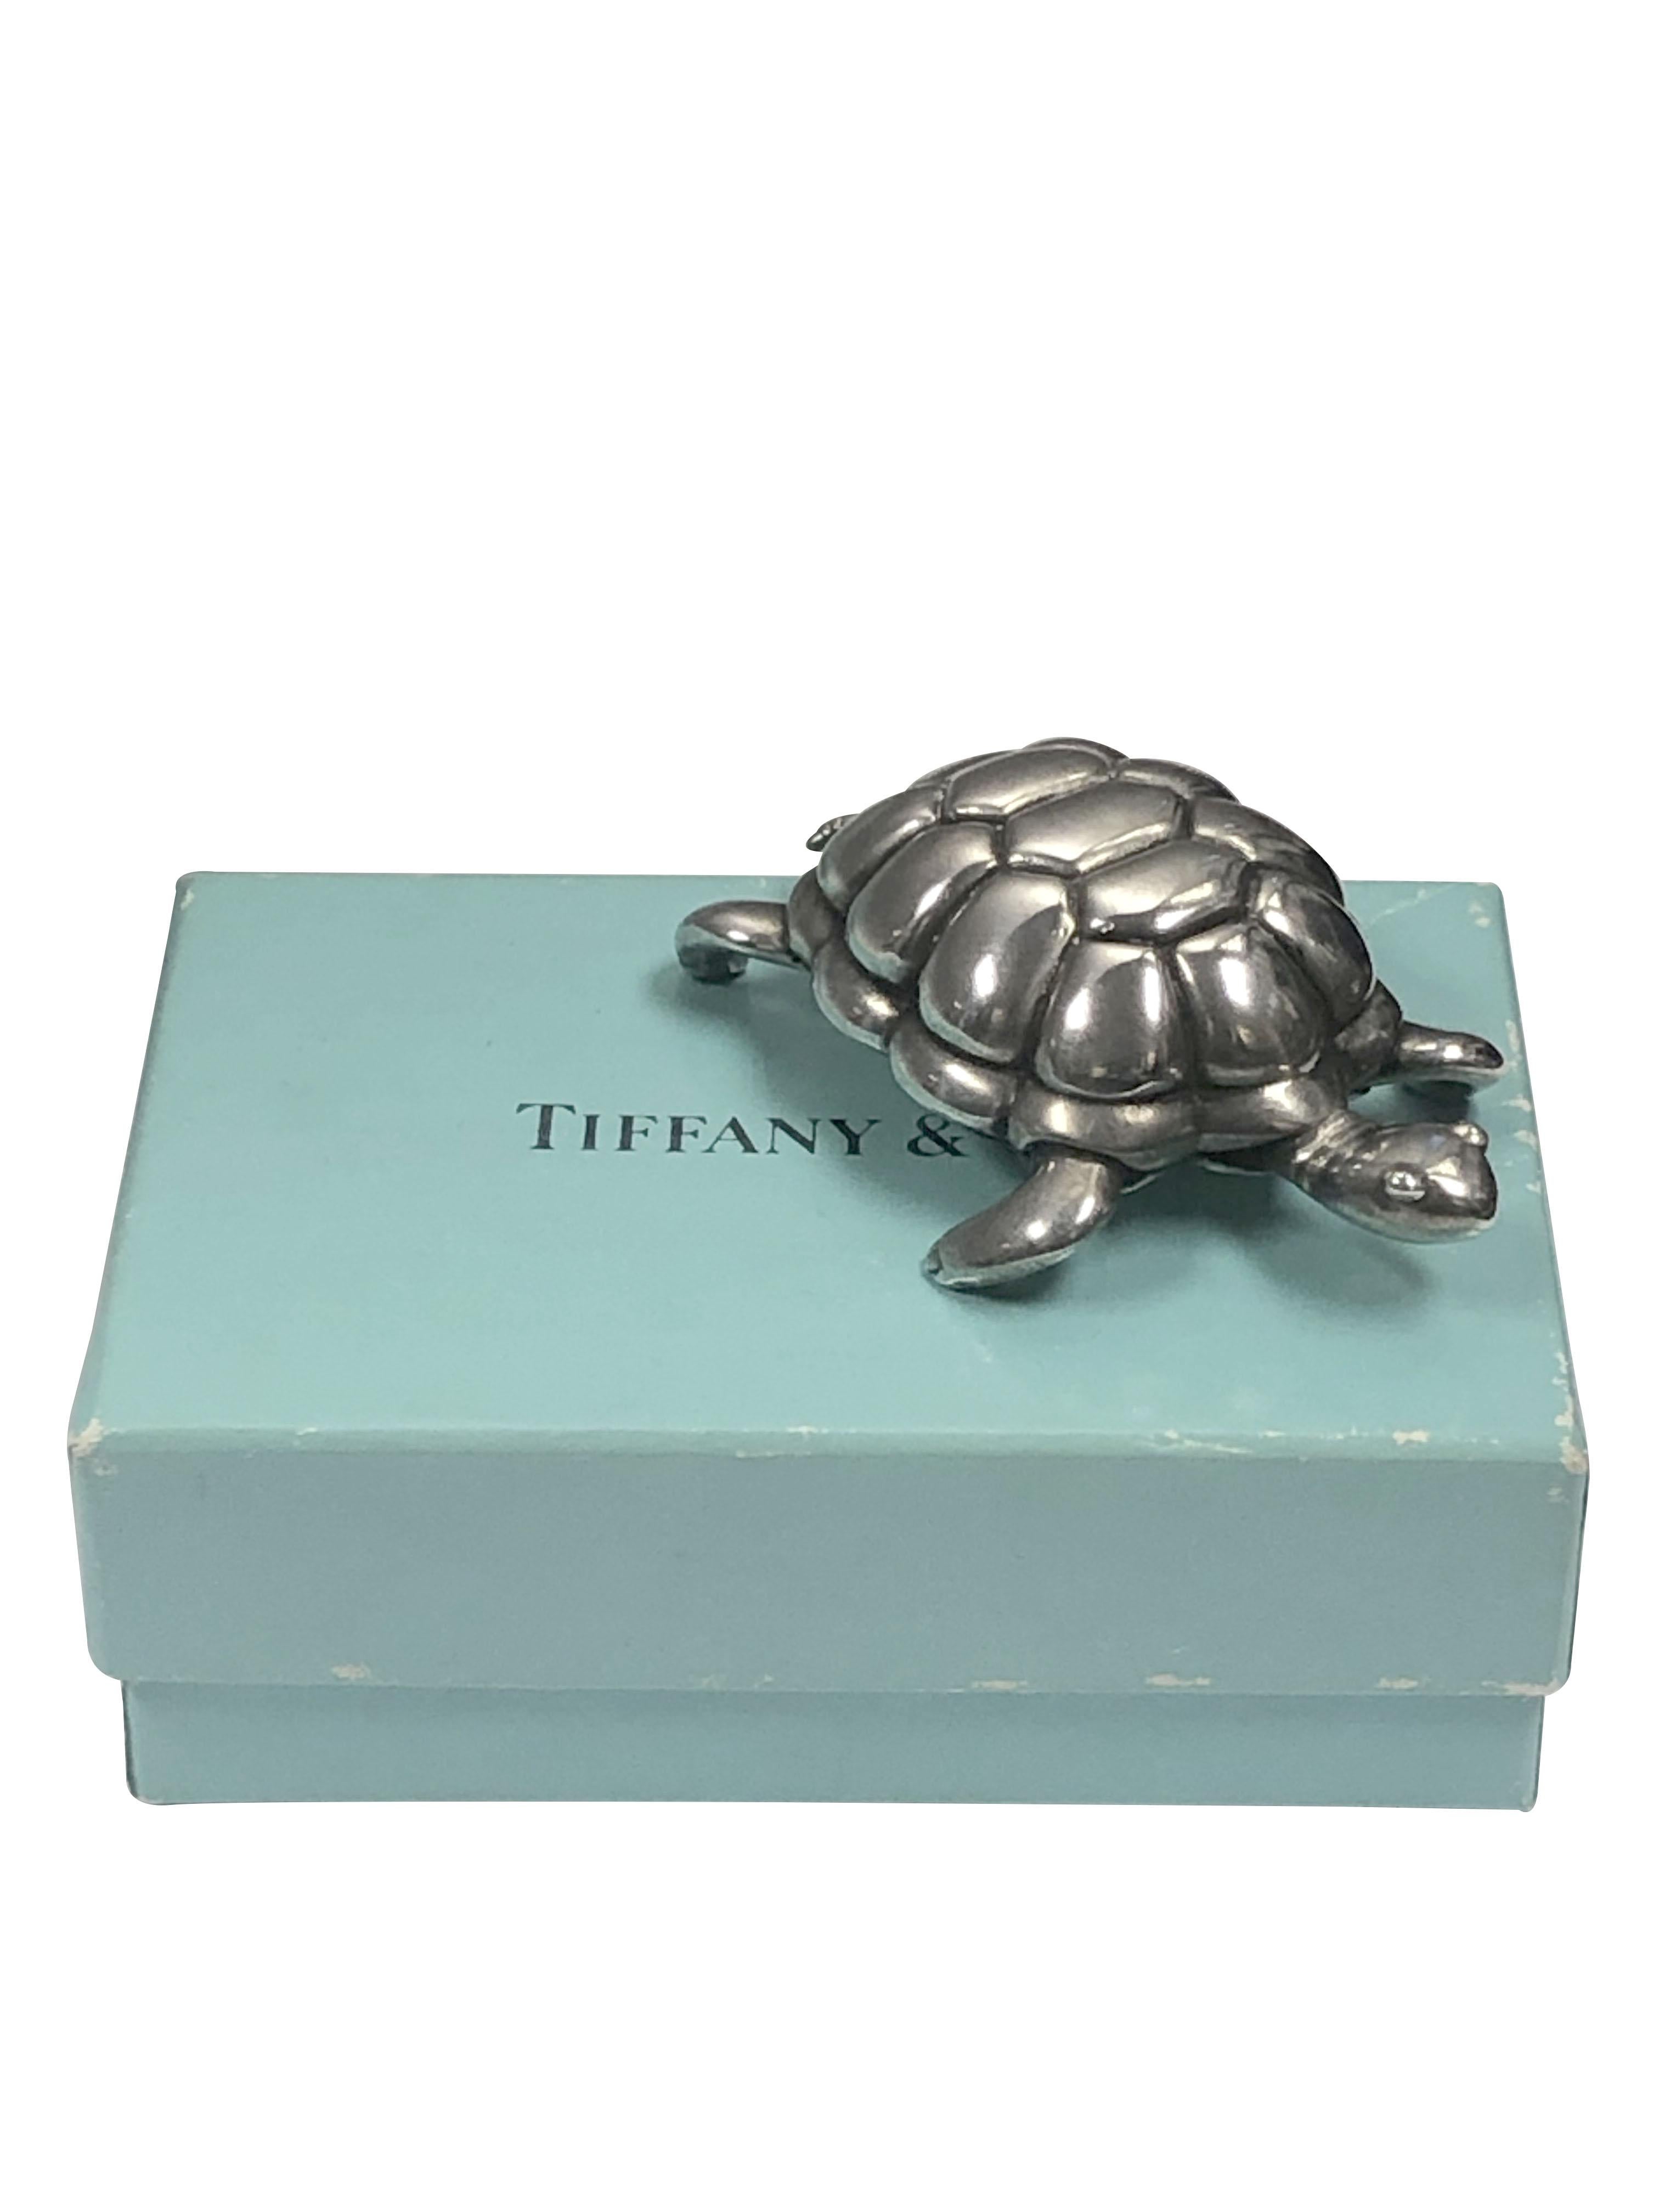 Circa 1998 Tiffany & Company Sterling Silver Turtle Paperweight, measuring 2 1/4 inches in length, 1 1/4 inches wide, 3/4 inch in height and weighing 3.5 Ounces, very finely detailed, comes in the original gift box. From a very limited production